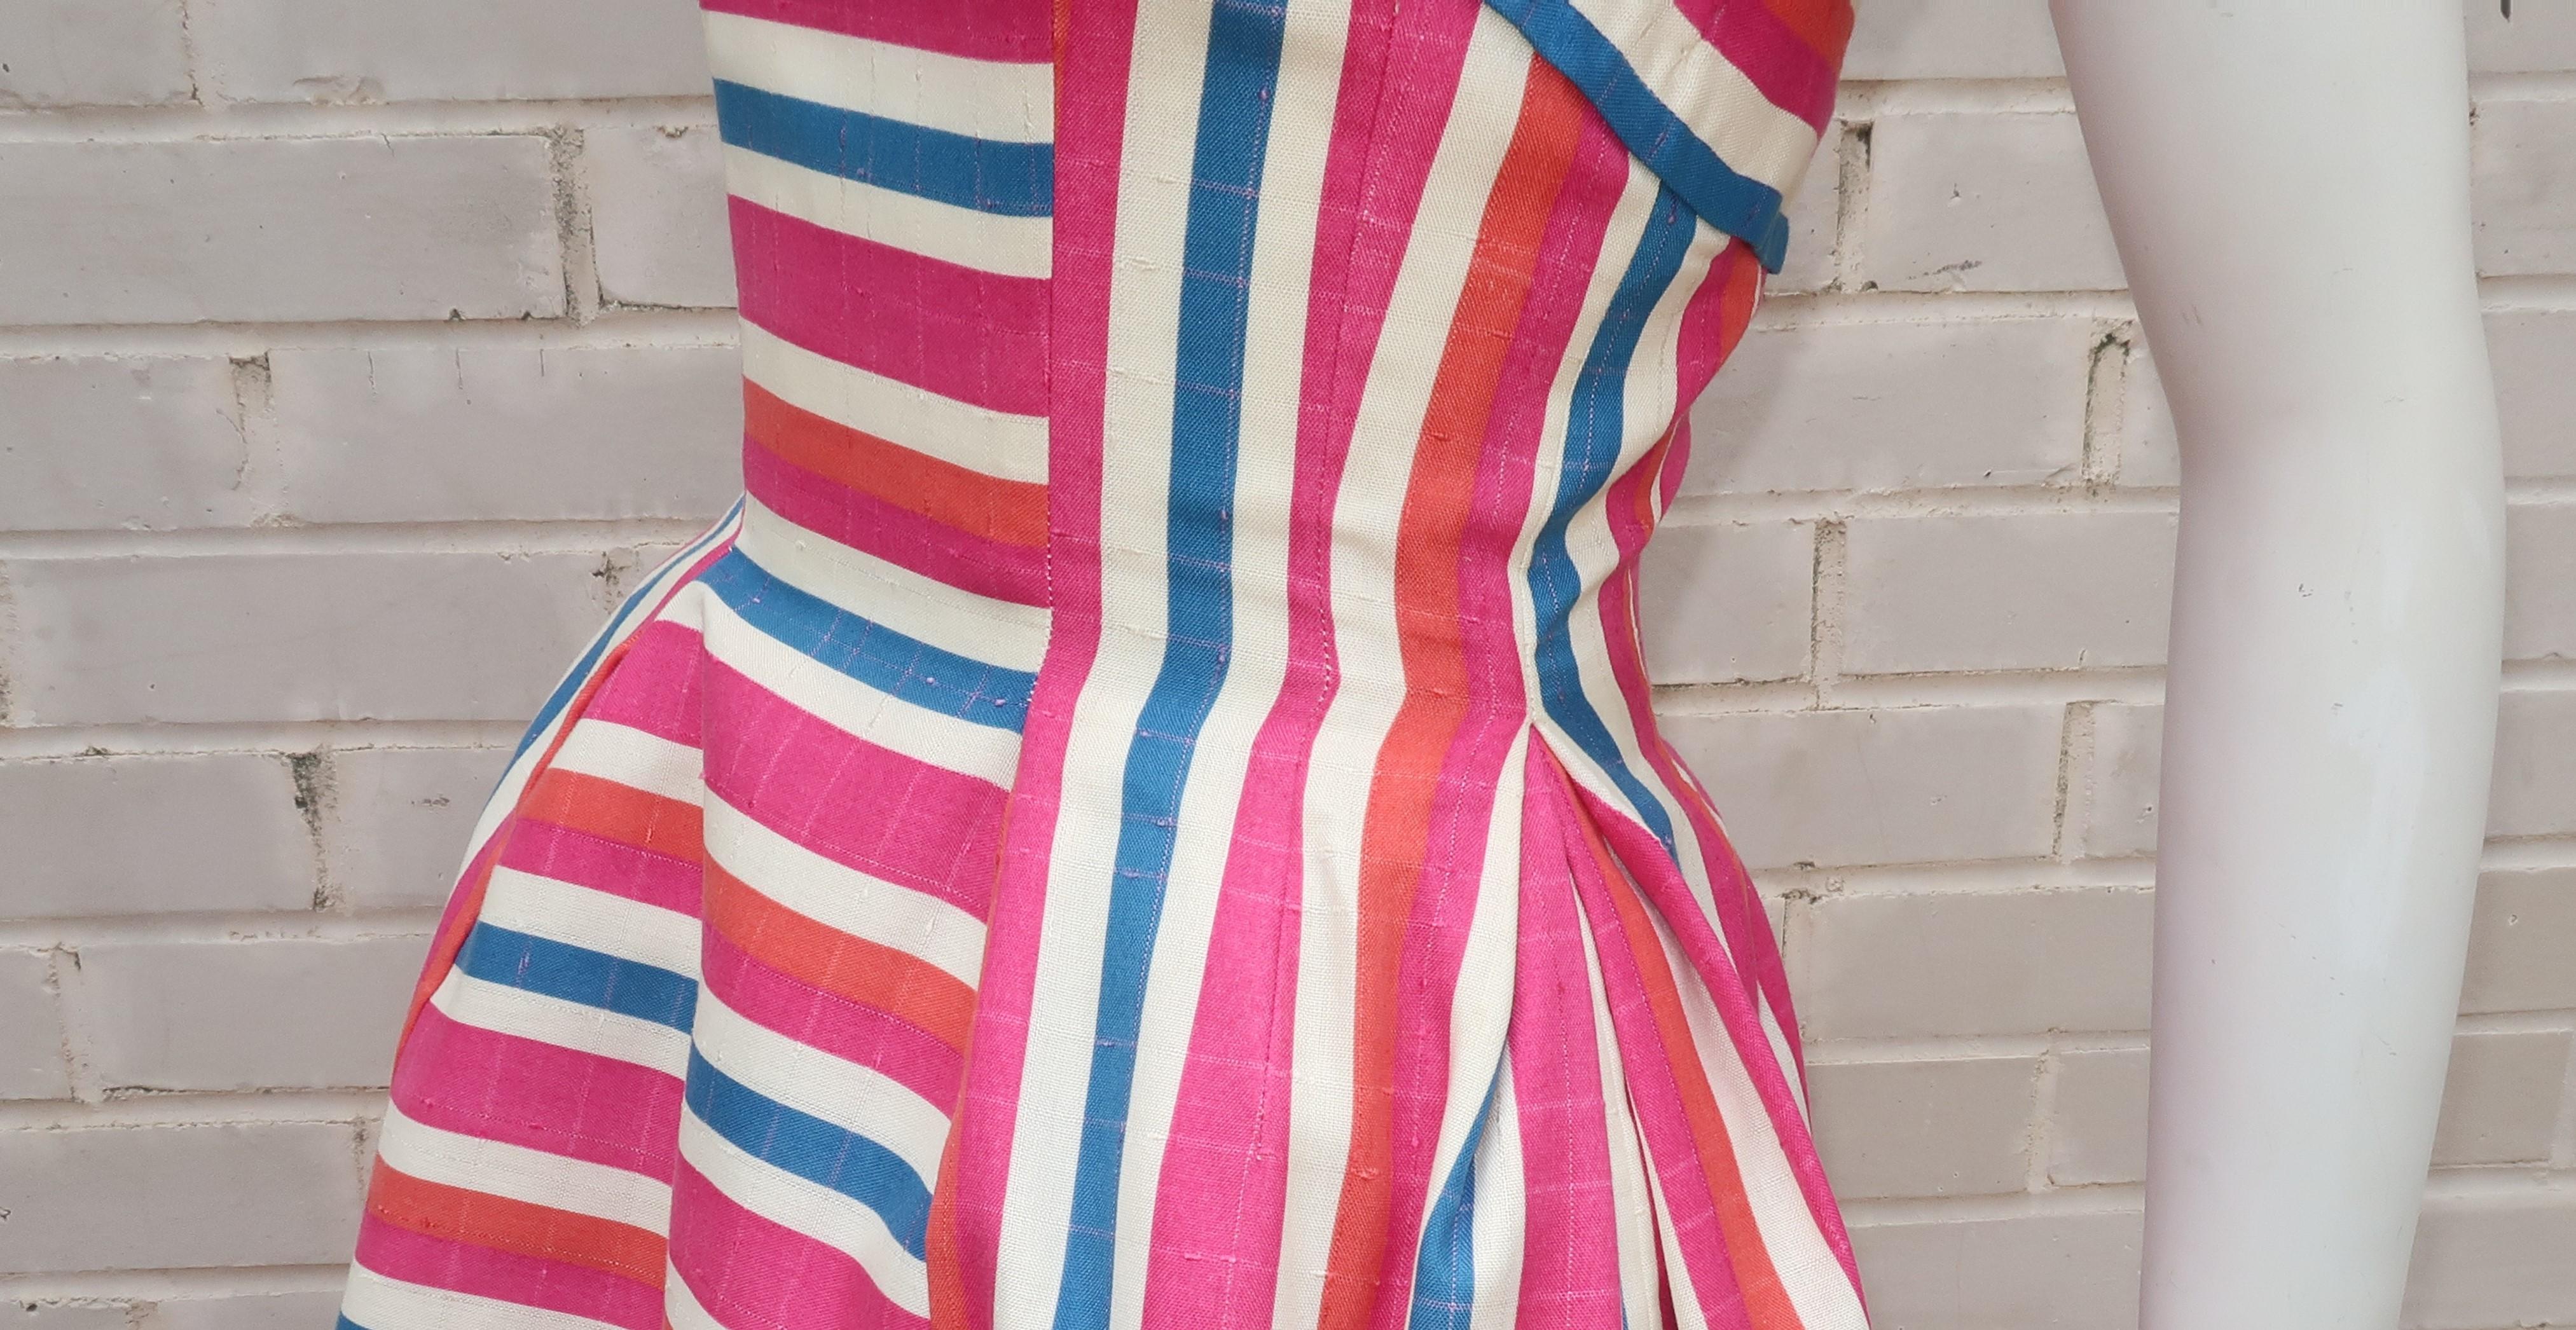 Striped Linen Sun Dress With Built-in Crinoline, C.1960 For Sale 2